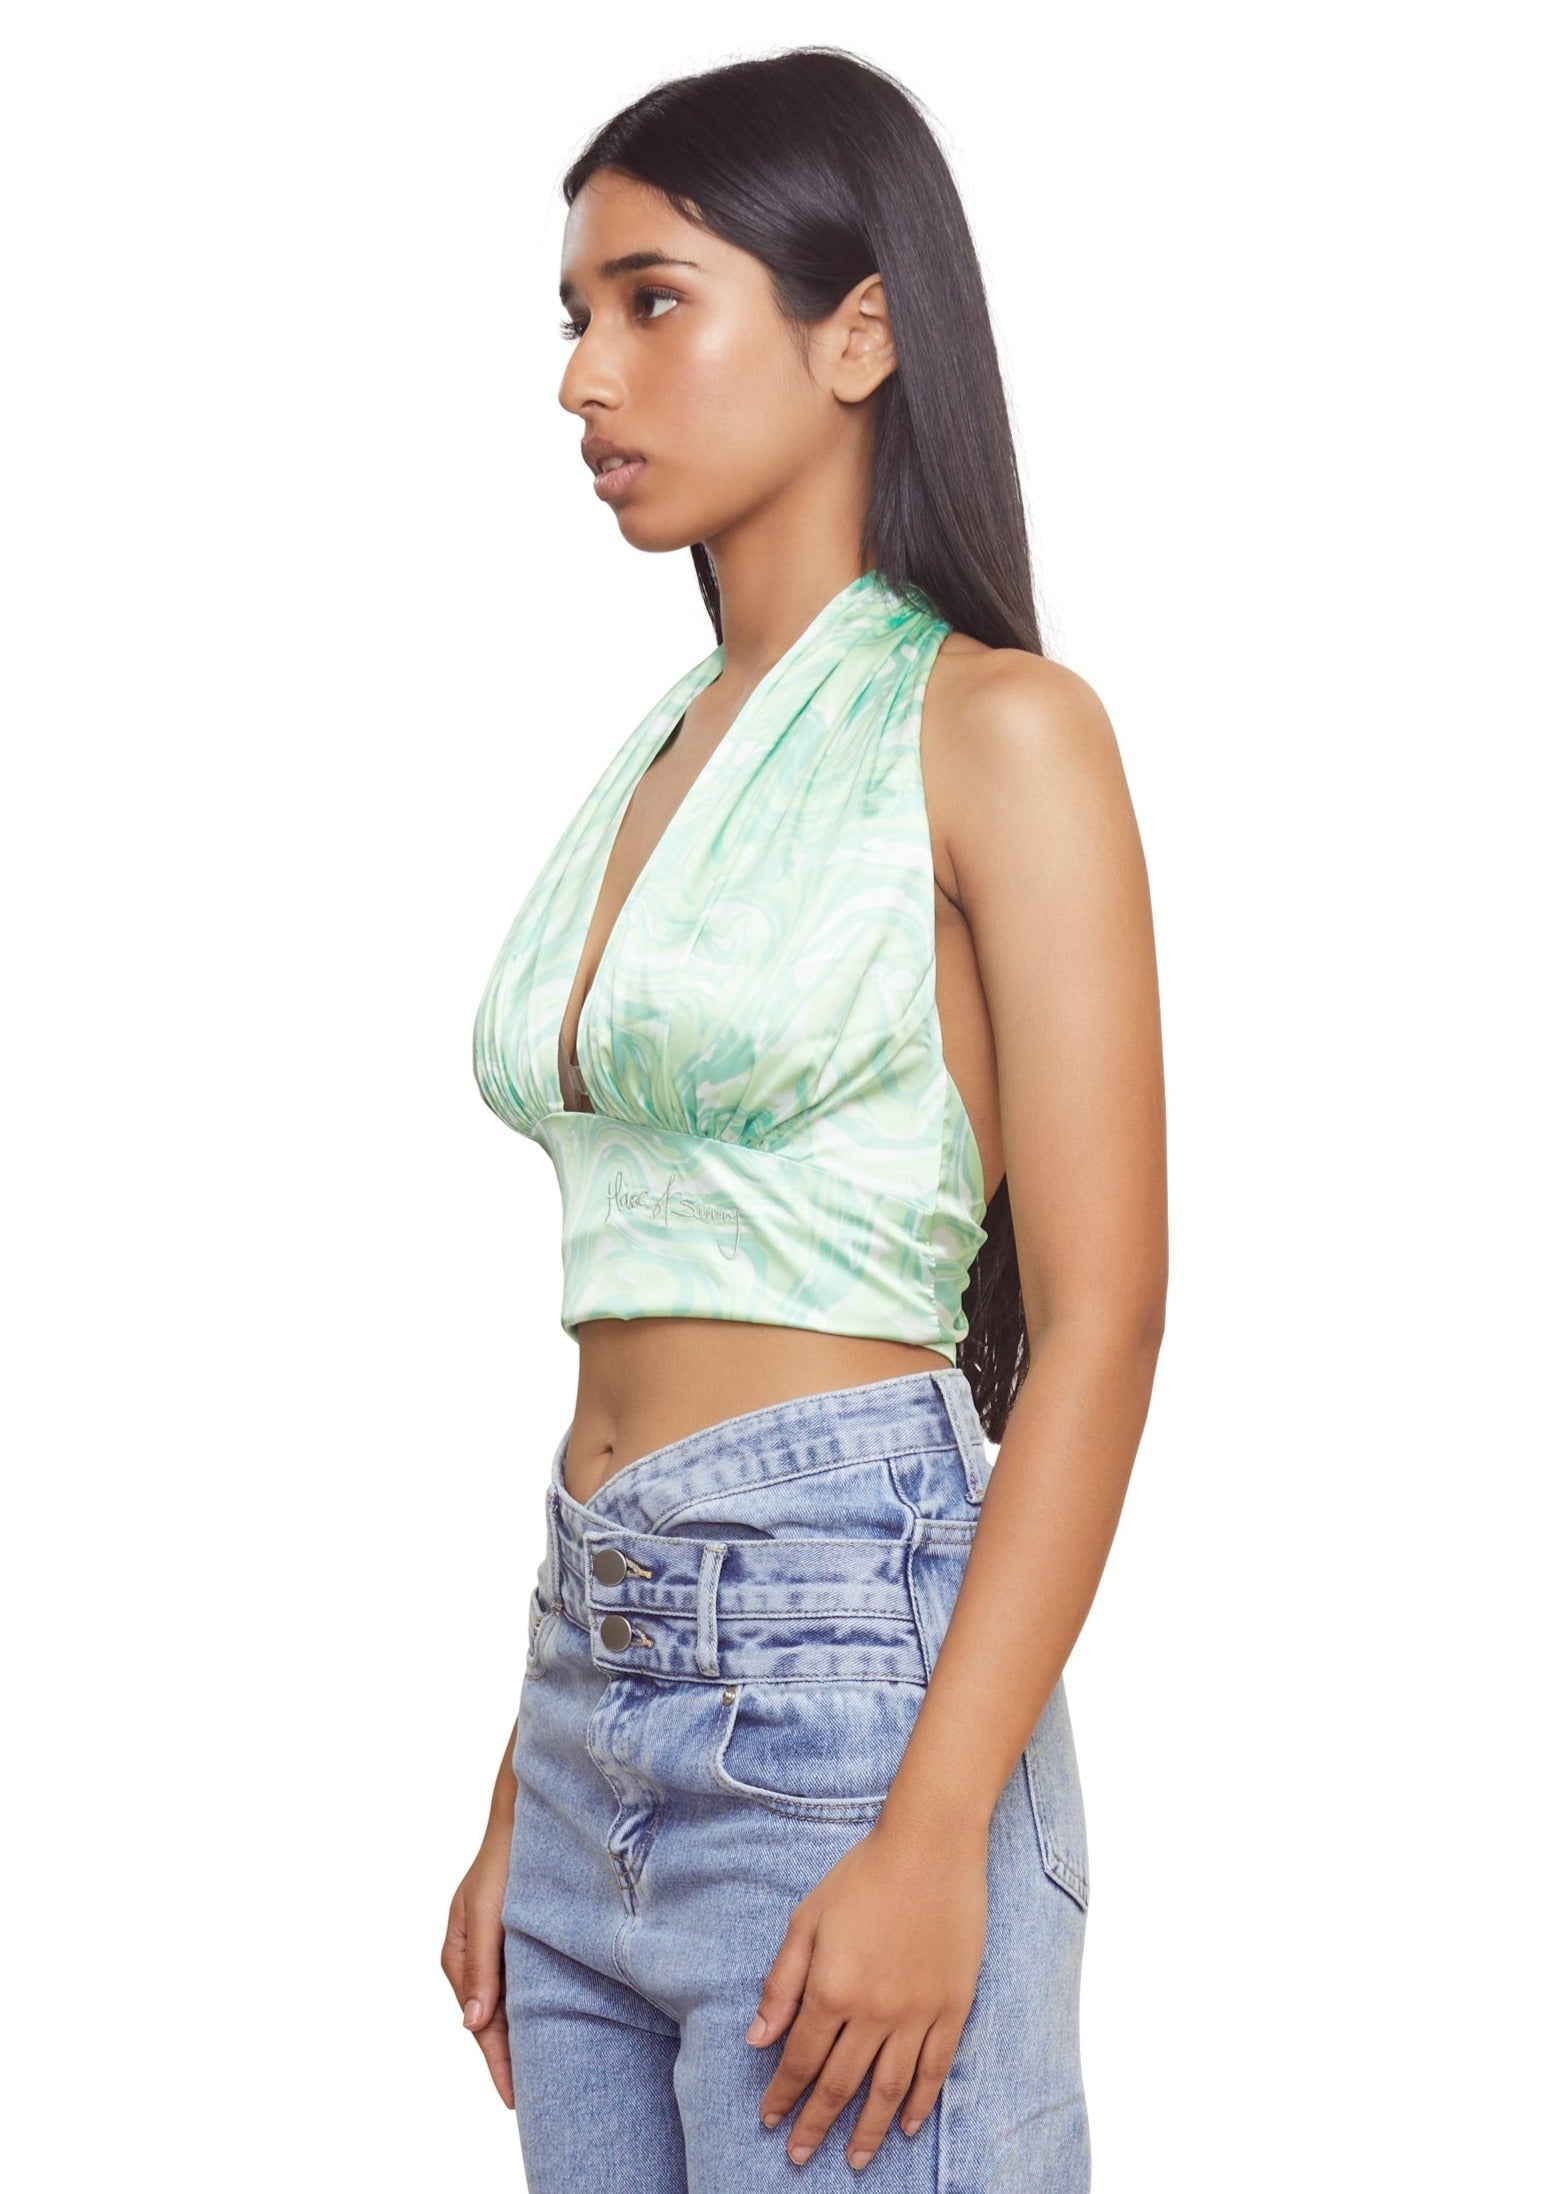 Green Halter neck tie top, w/ side botton fastening & purse from the brand House Of Sunny